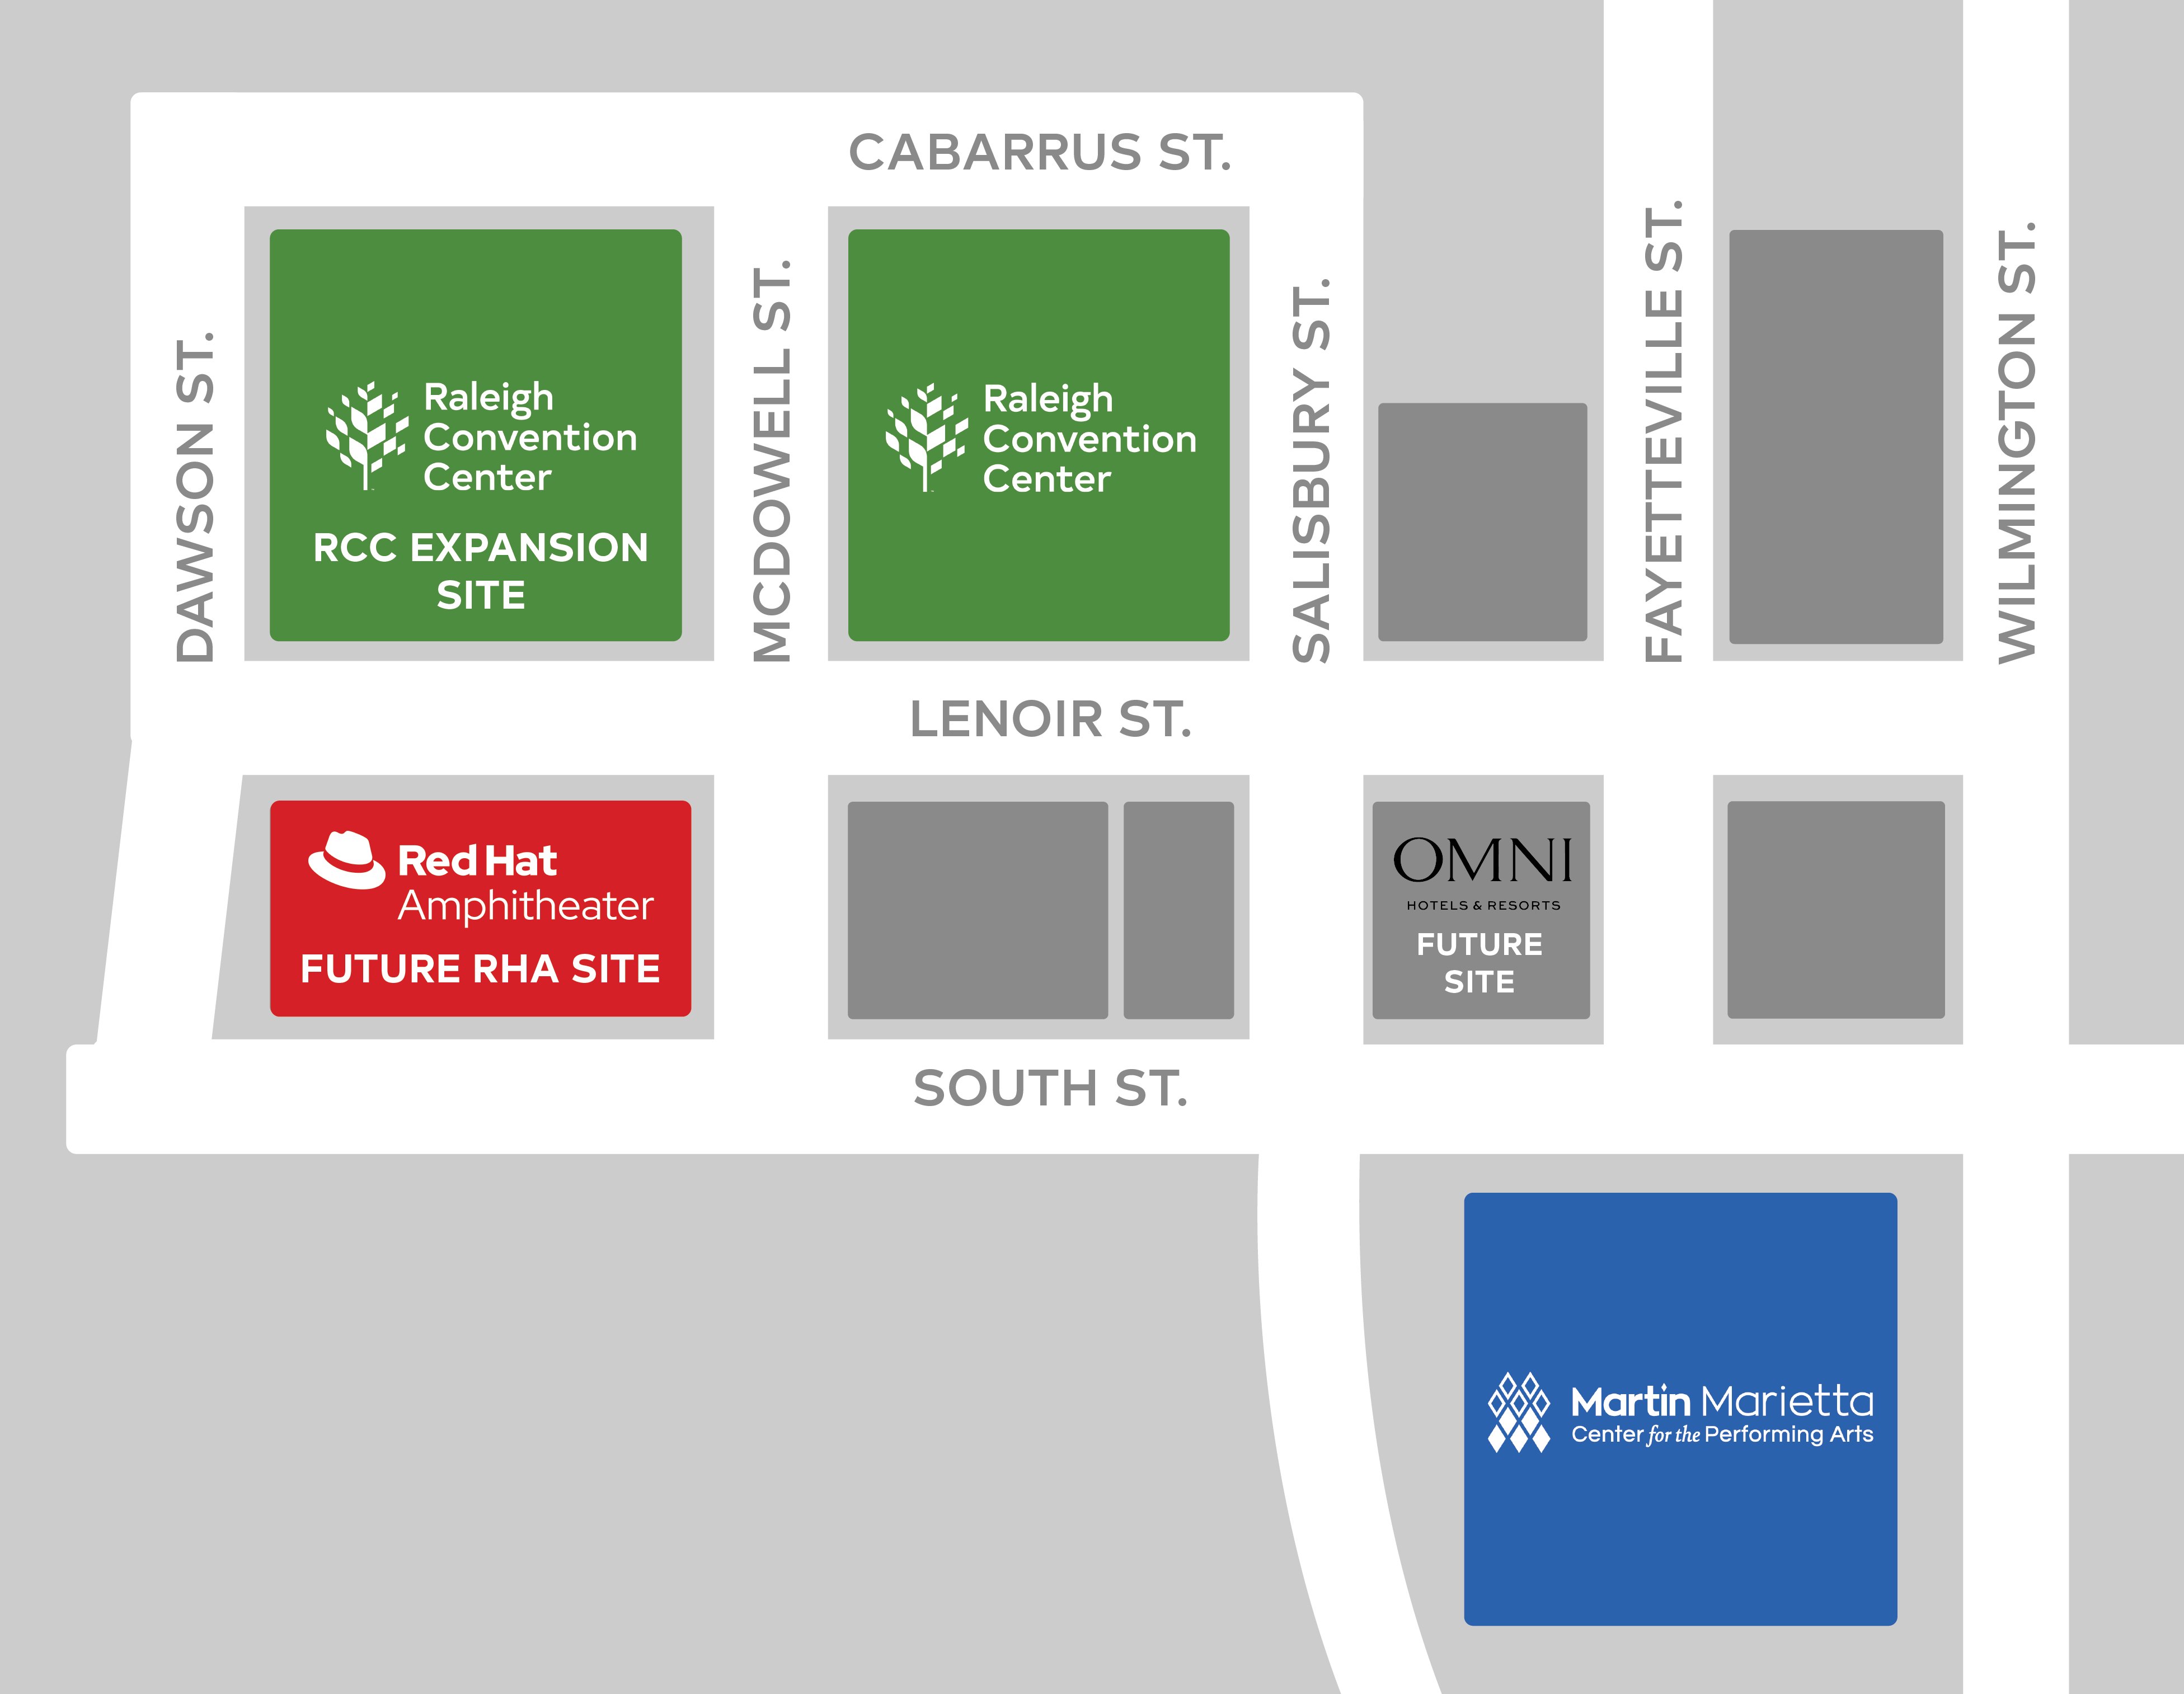 downtown raleigh map showing future location of raleigh convention center and red hat amphitheater